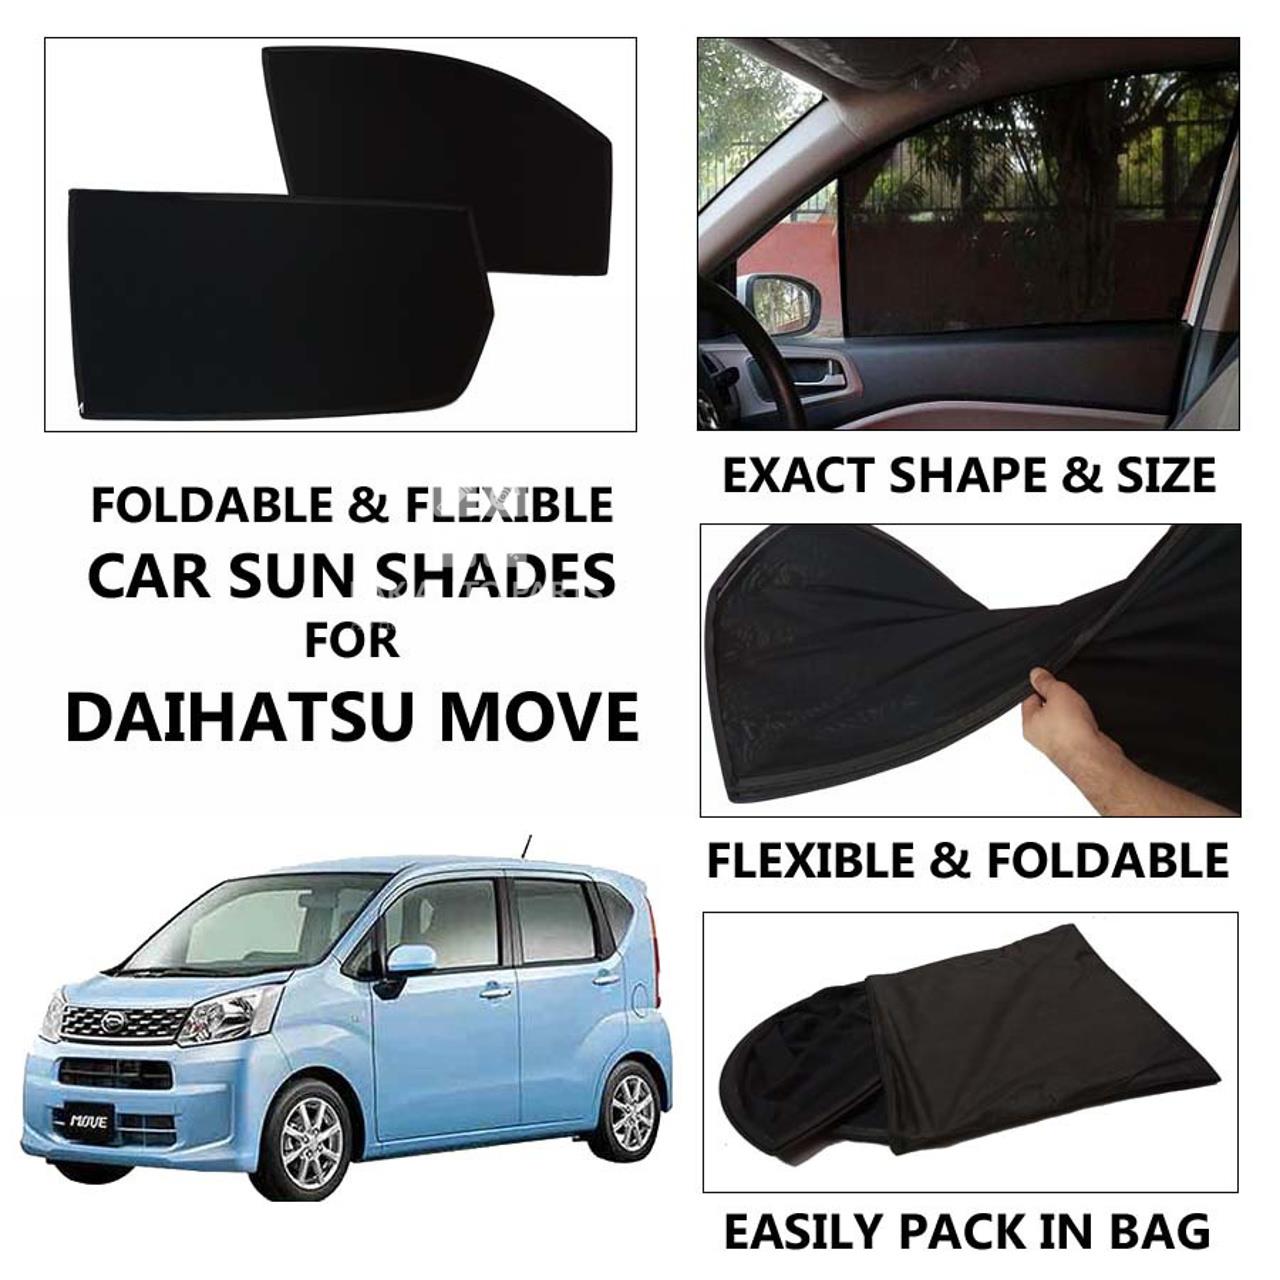 Picture of Foldable & Flexible Car Sunshades For Daihatsu Move - Dark Black - High Quality Jersy Cloth